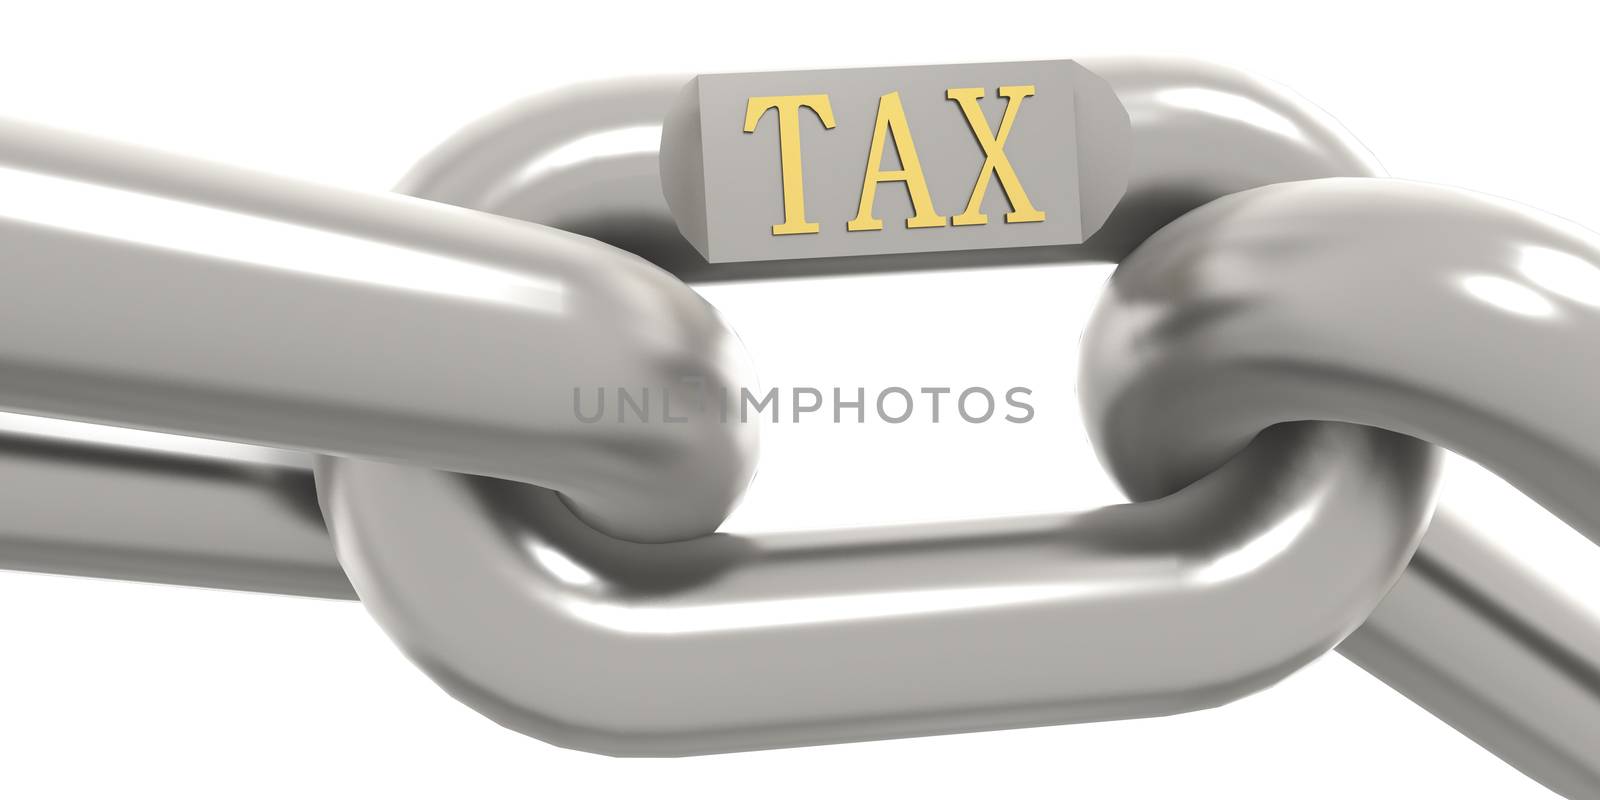 Tax word with metal chain by tang90246